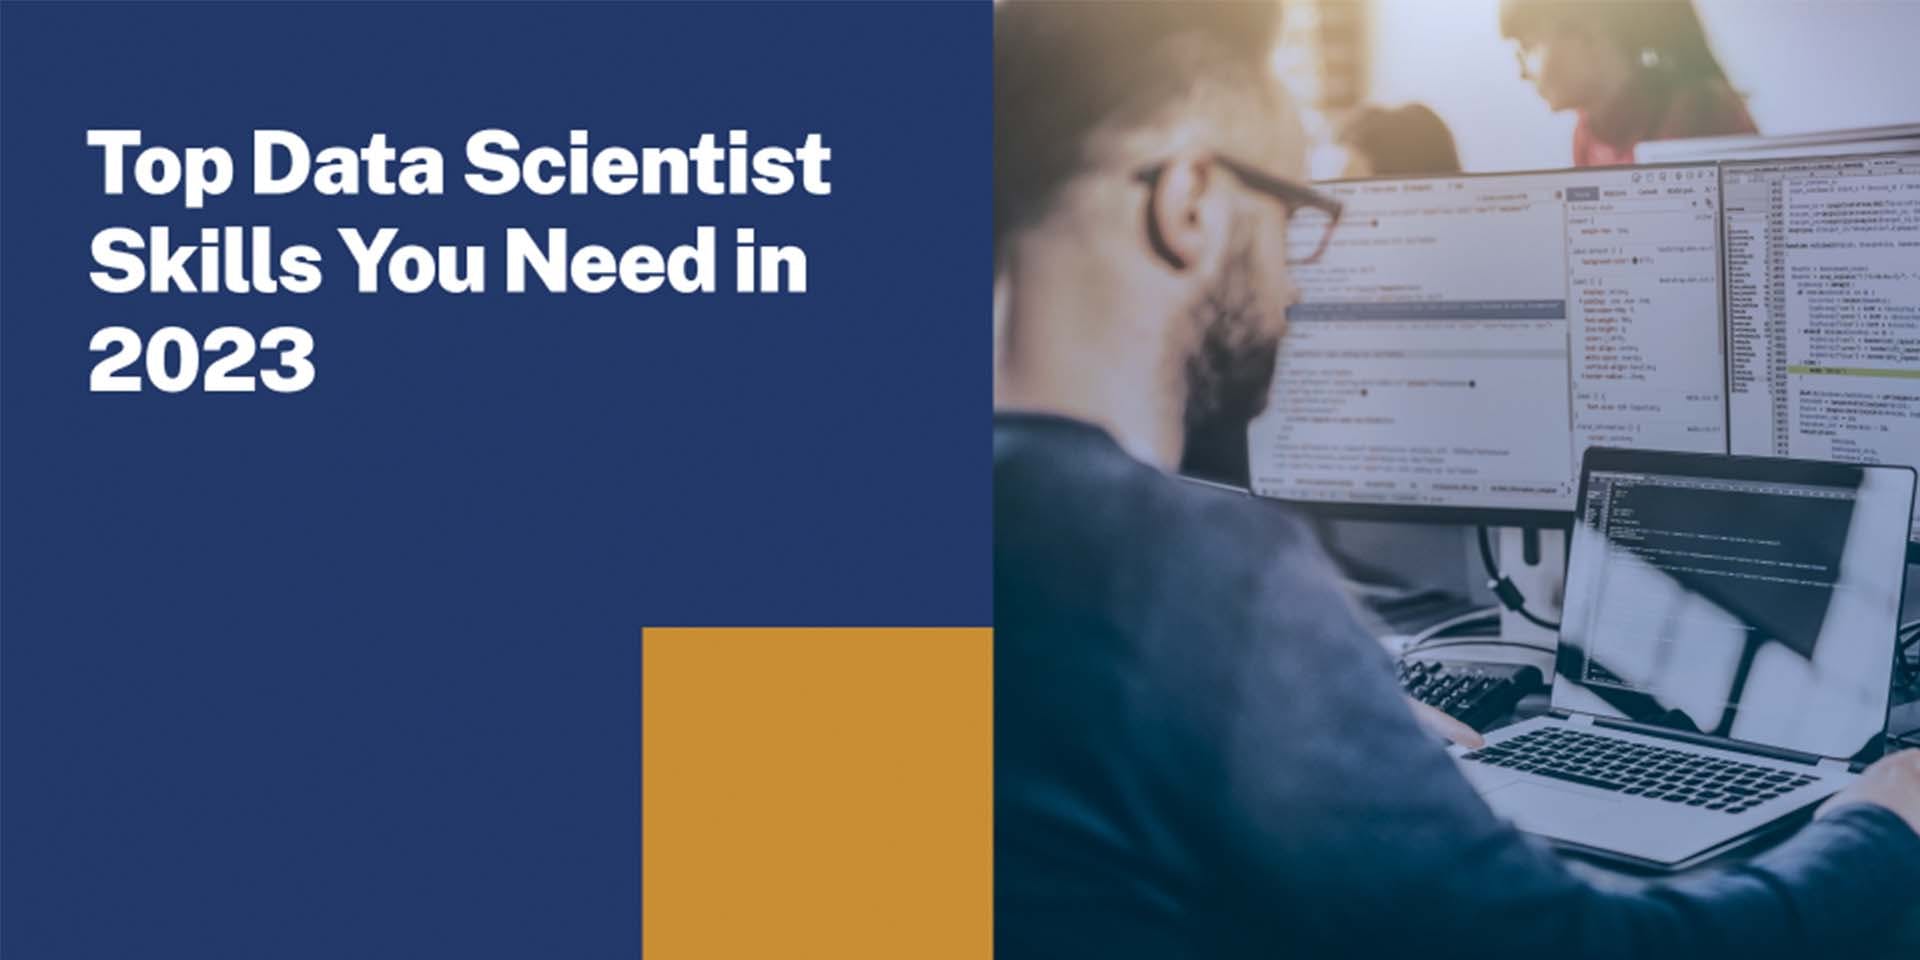 Top Data Scientist Skills You Need in 2023